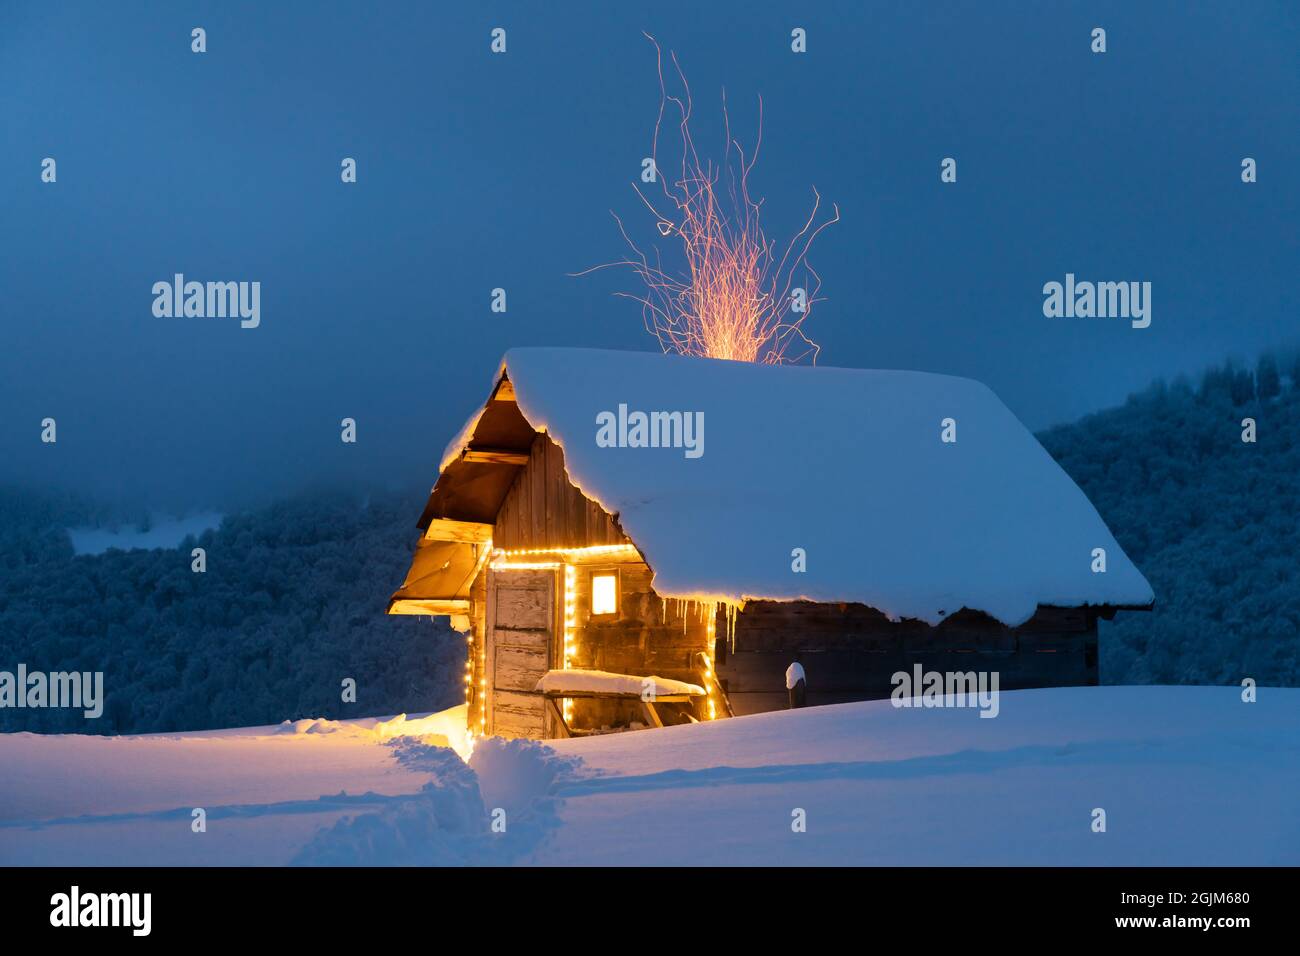 Fantastic winter landscape with glowing wooden cabin in snowy forest. Fire sparks fly out of the chimney. Christmas holiday concept Stock Photo